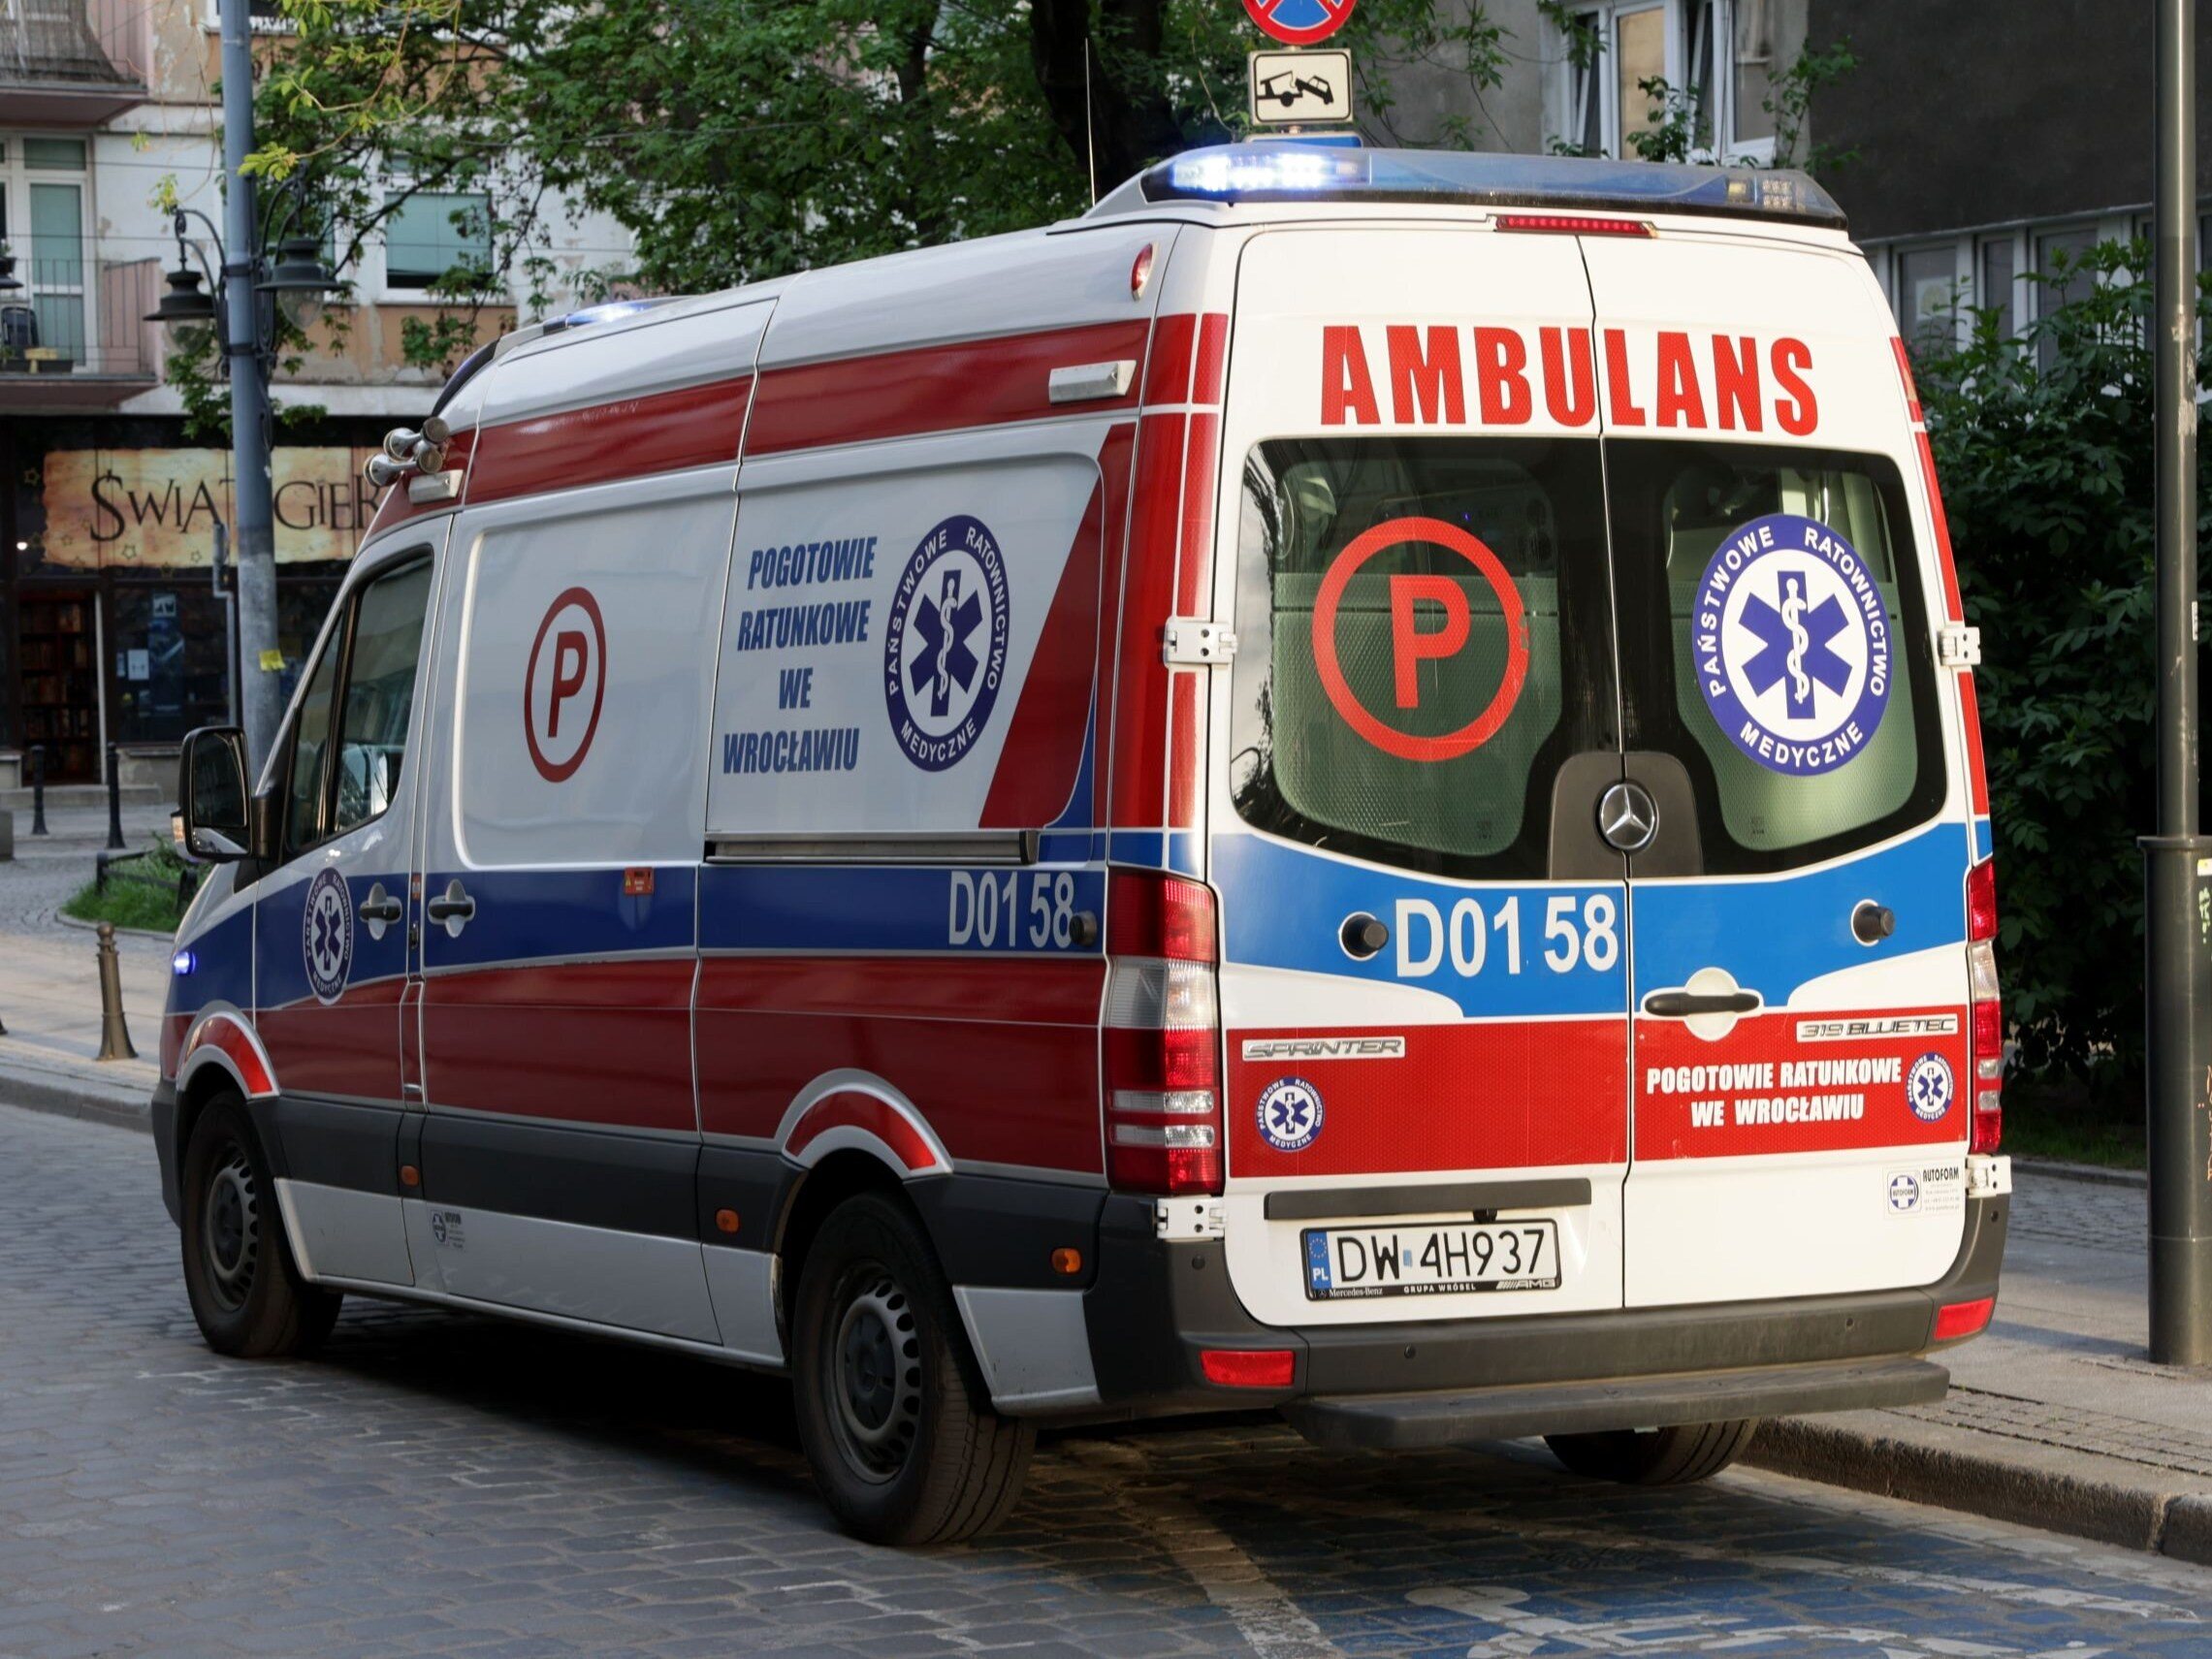 Will the ambulance arrive in 15 minutes?  Marshal Witek's promises should already be fulfilled